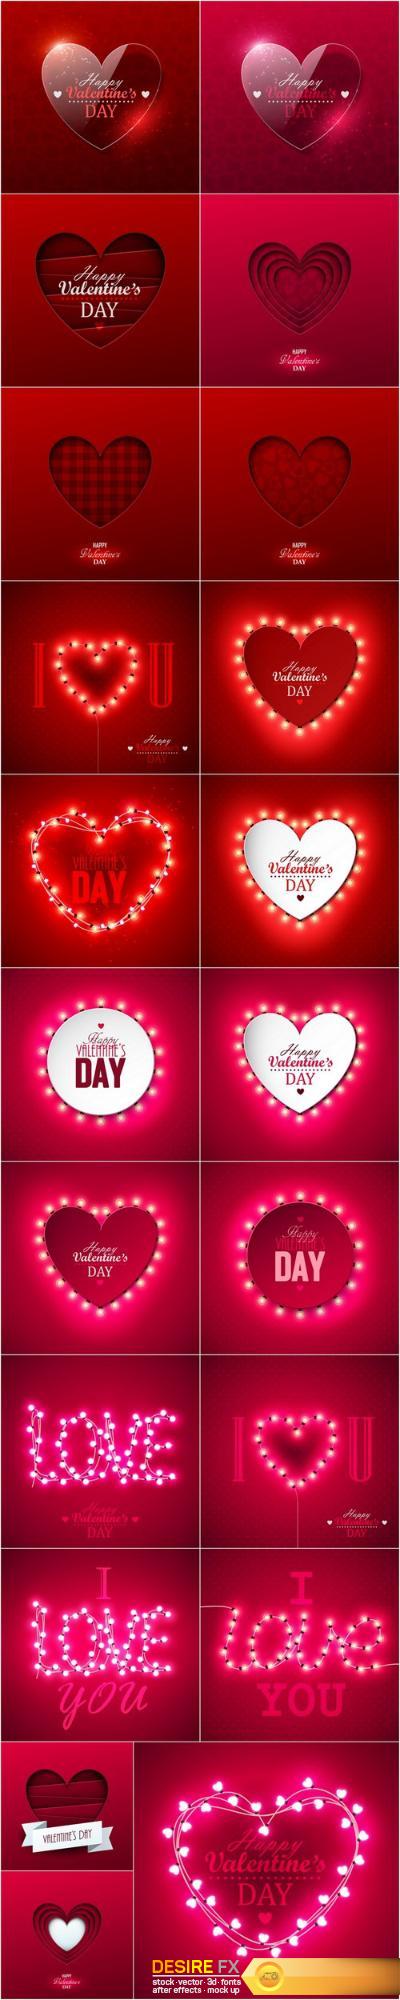 Heart & Love - Happy Valentines Day 7 - Set of 21xEPS Professional Vector Stock